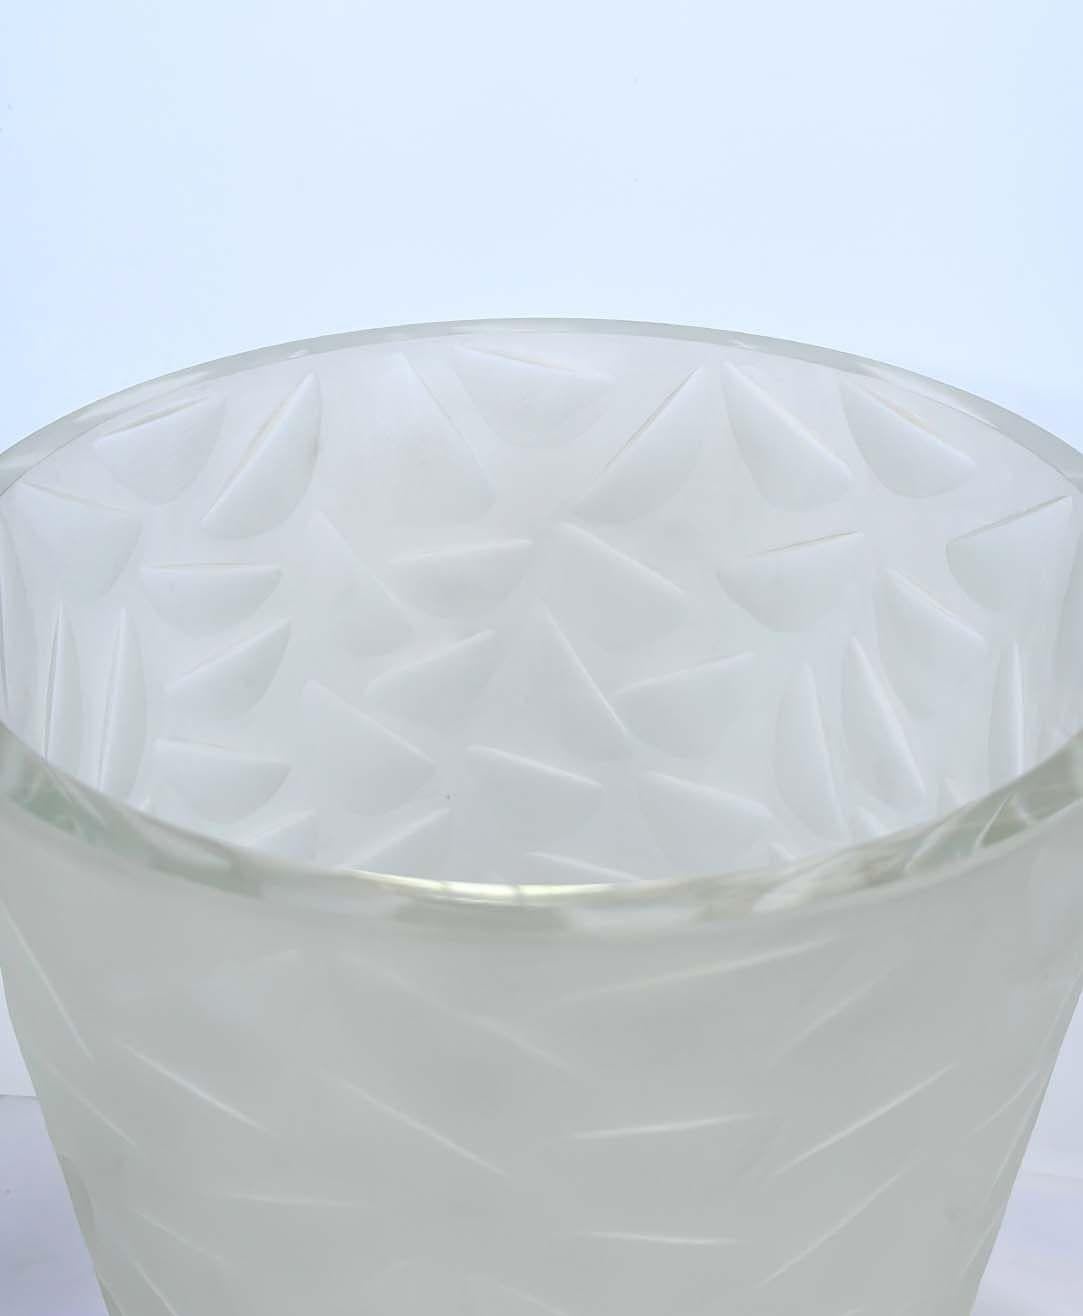 Vintage Murano glass ice bucket with geometric relief design all around by Salviati. Made in Italy for the 